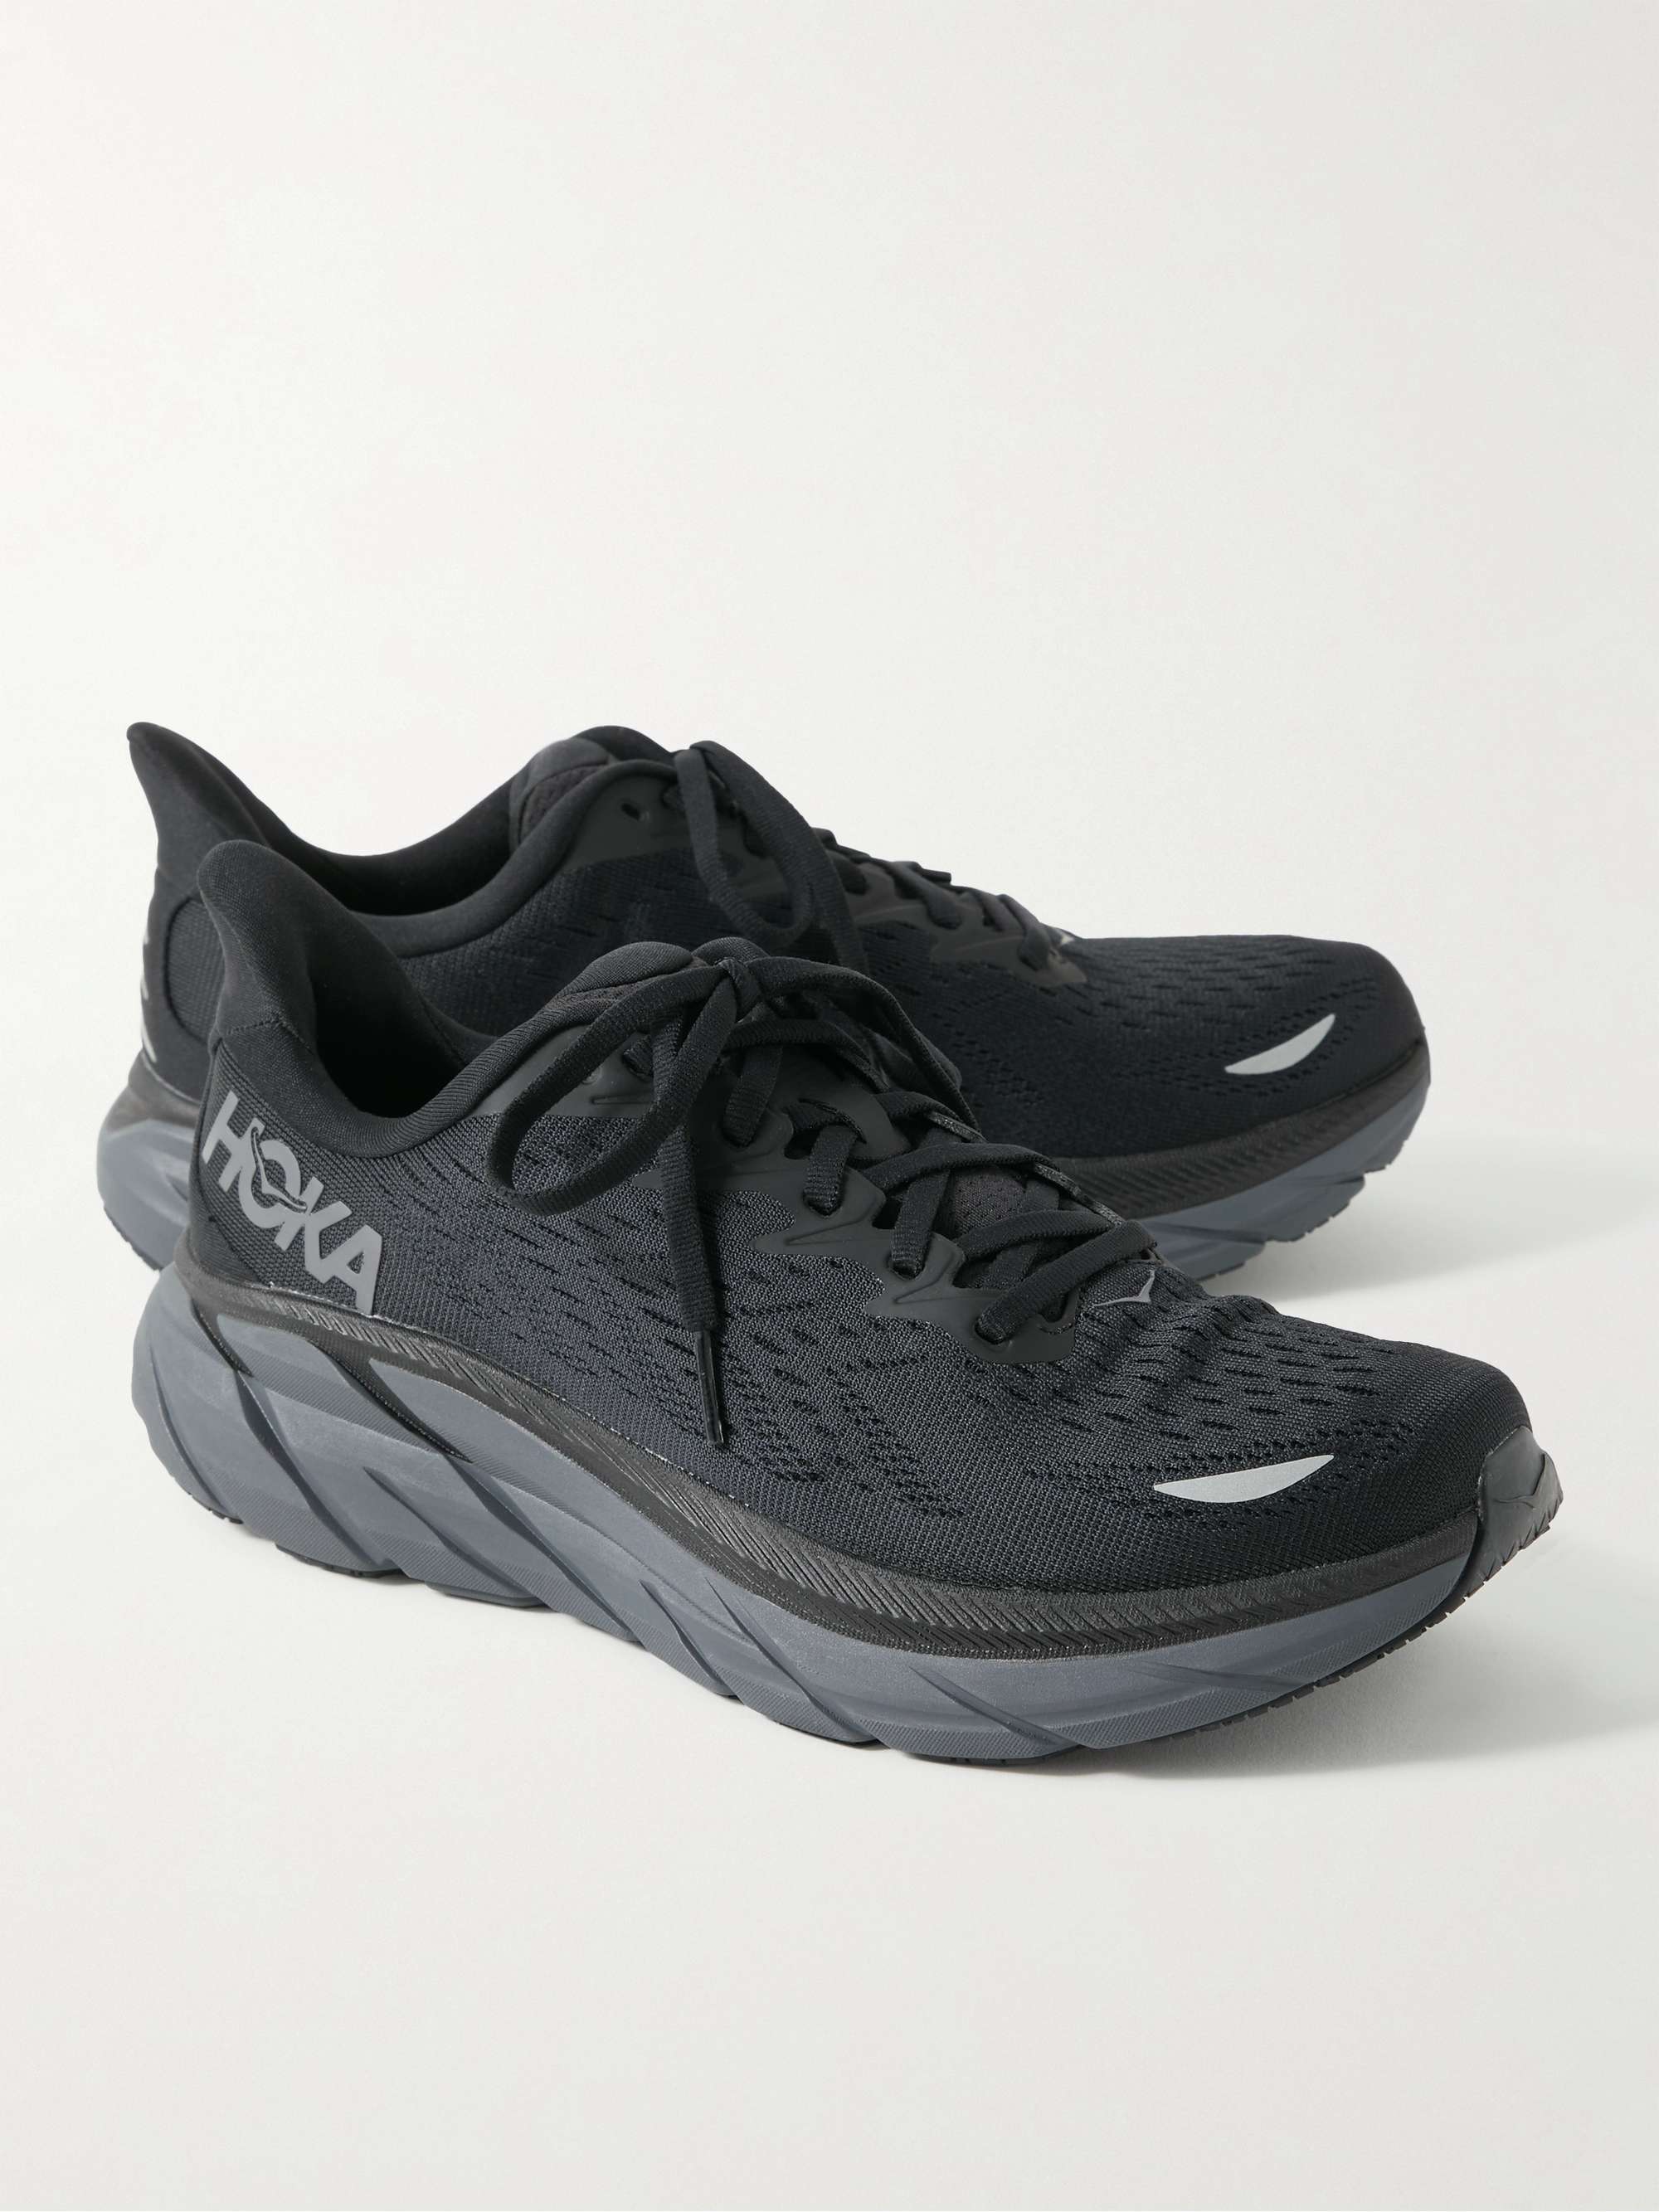 HOKA ONE ONE Clifton 8 Rubber-Trimmed Mesh Running Sneakers